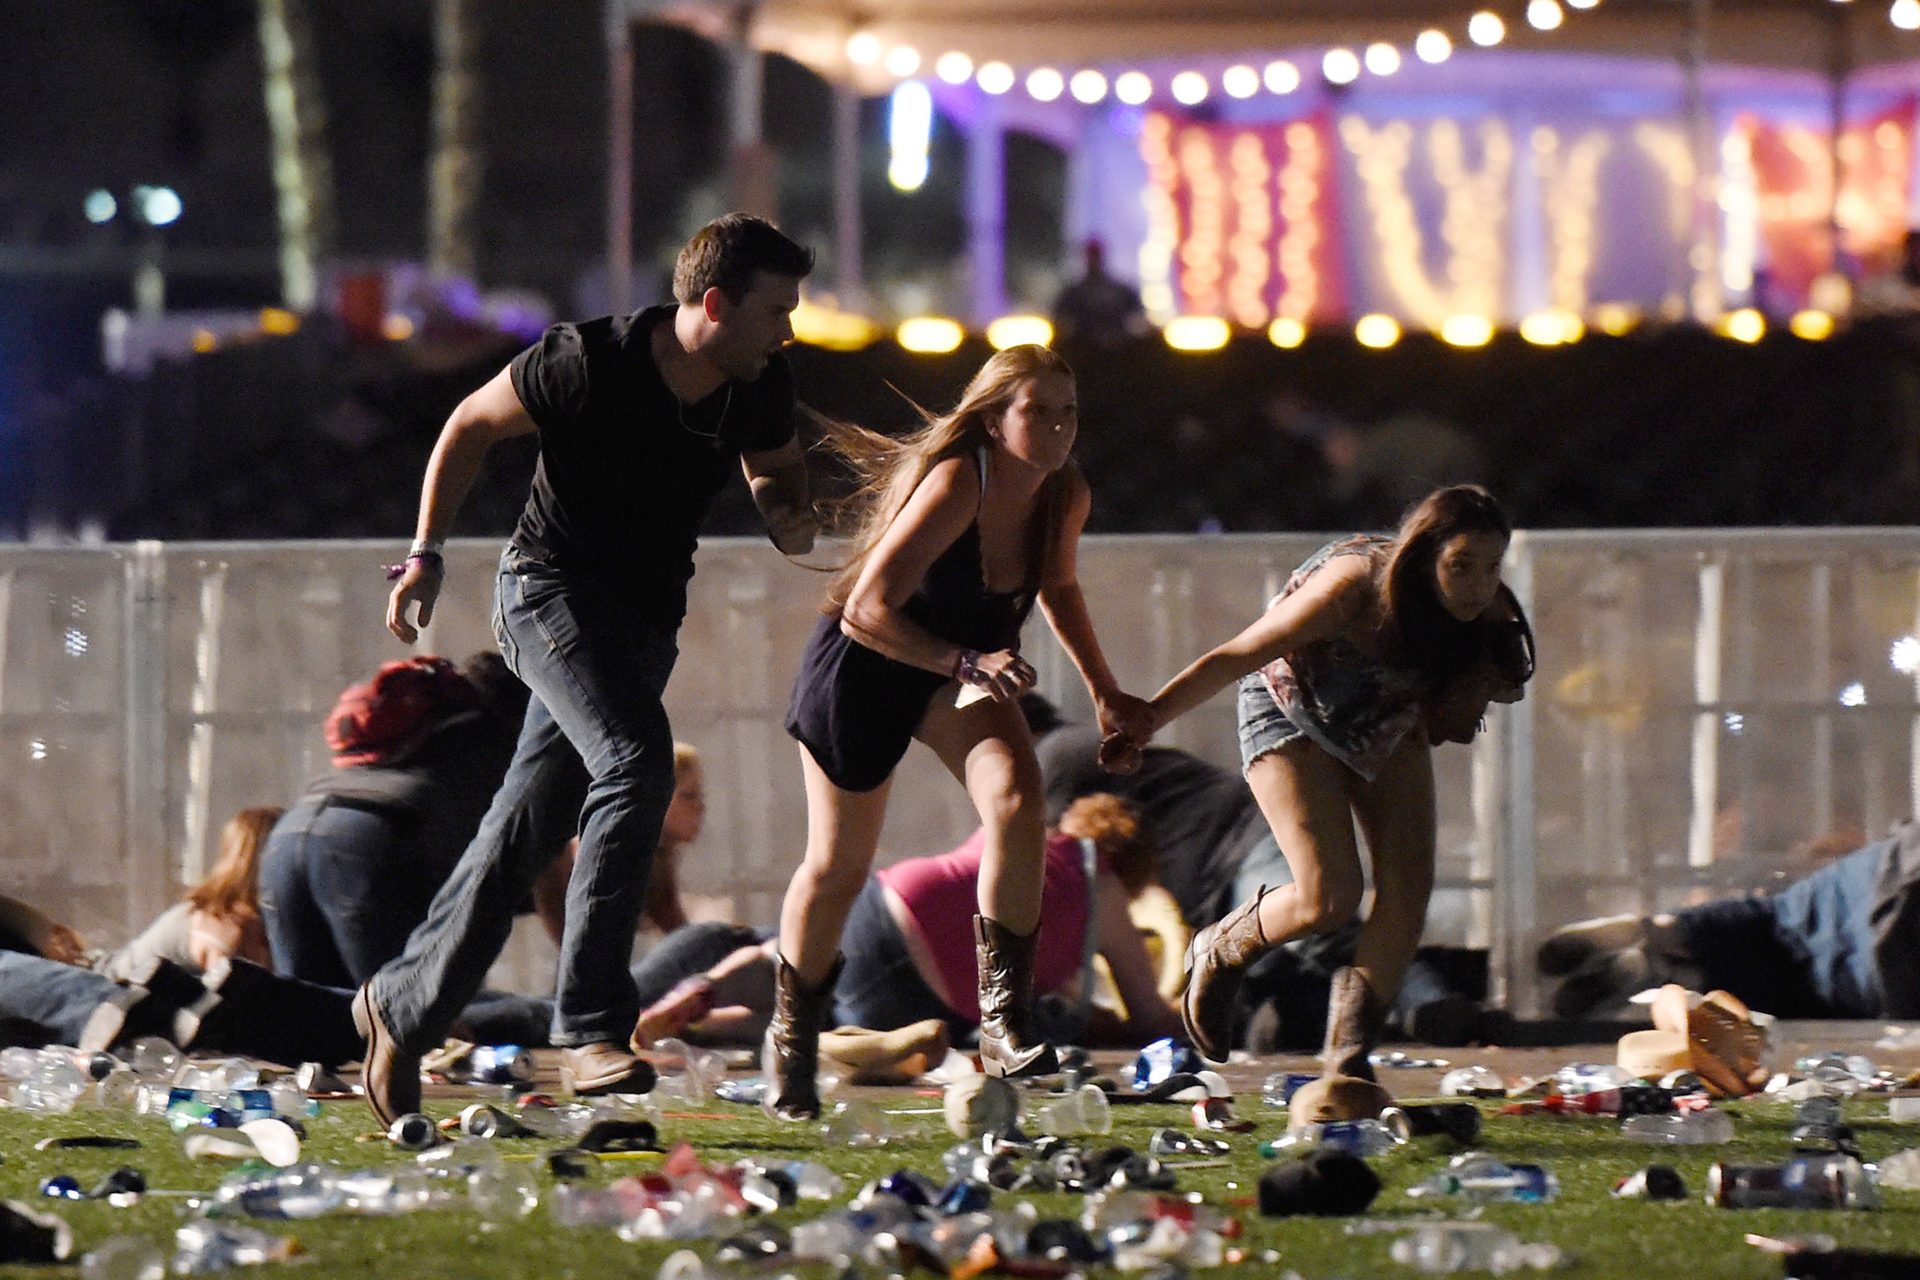 Aldean was performing in Las Vegas during a historic mass shooting